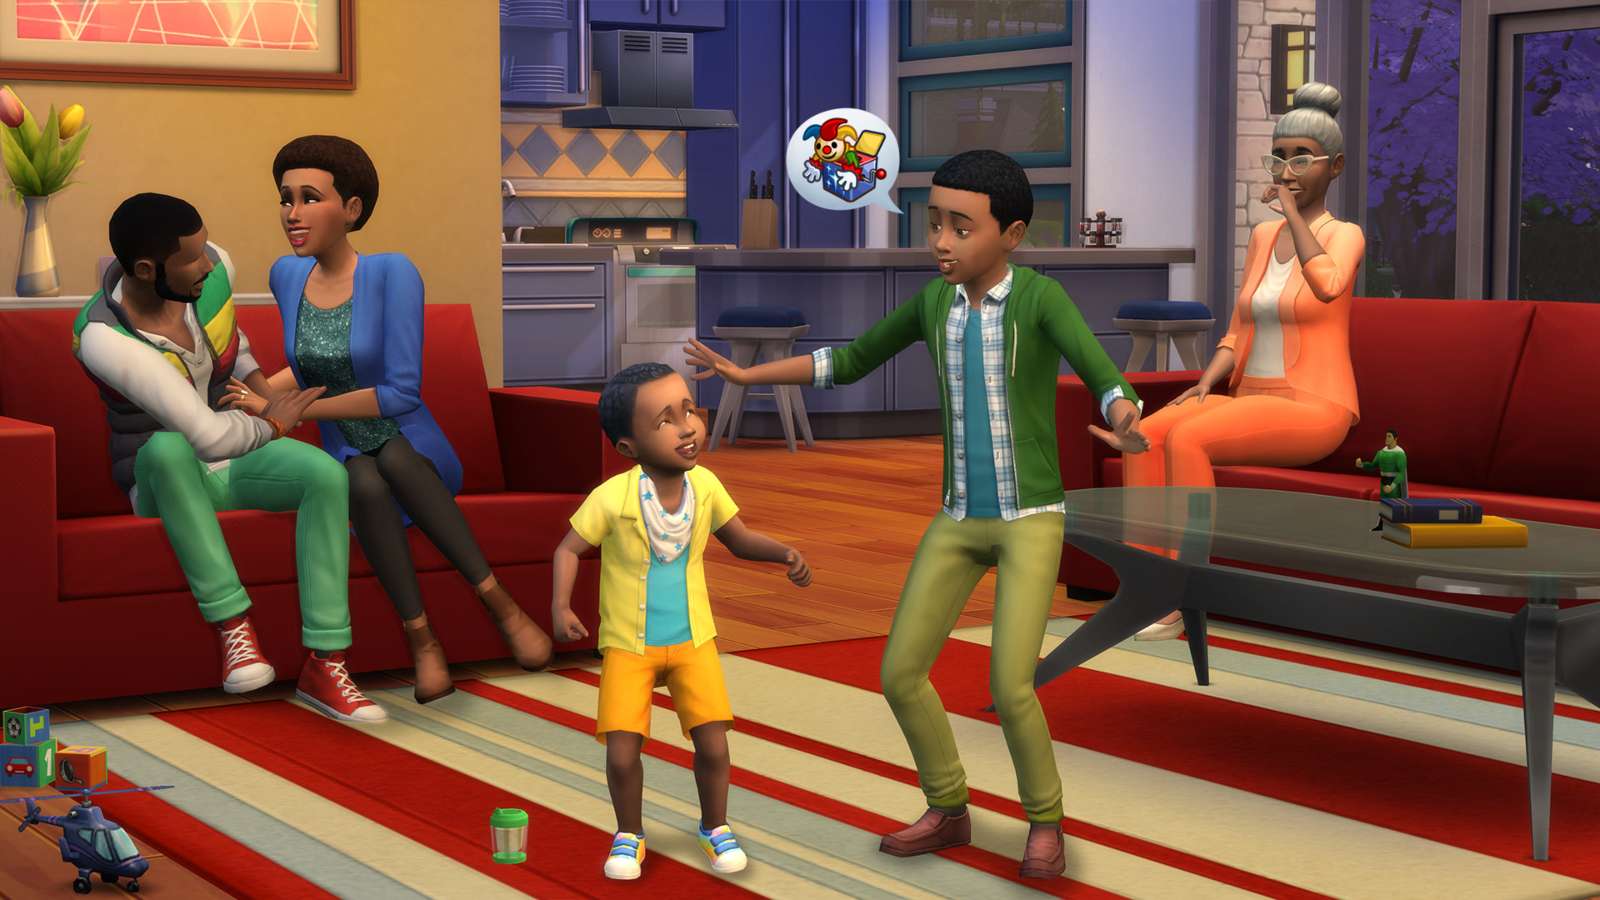 A Sims 4 screenshot featuring three generations of a family